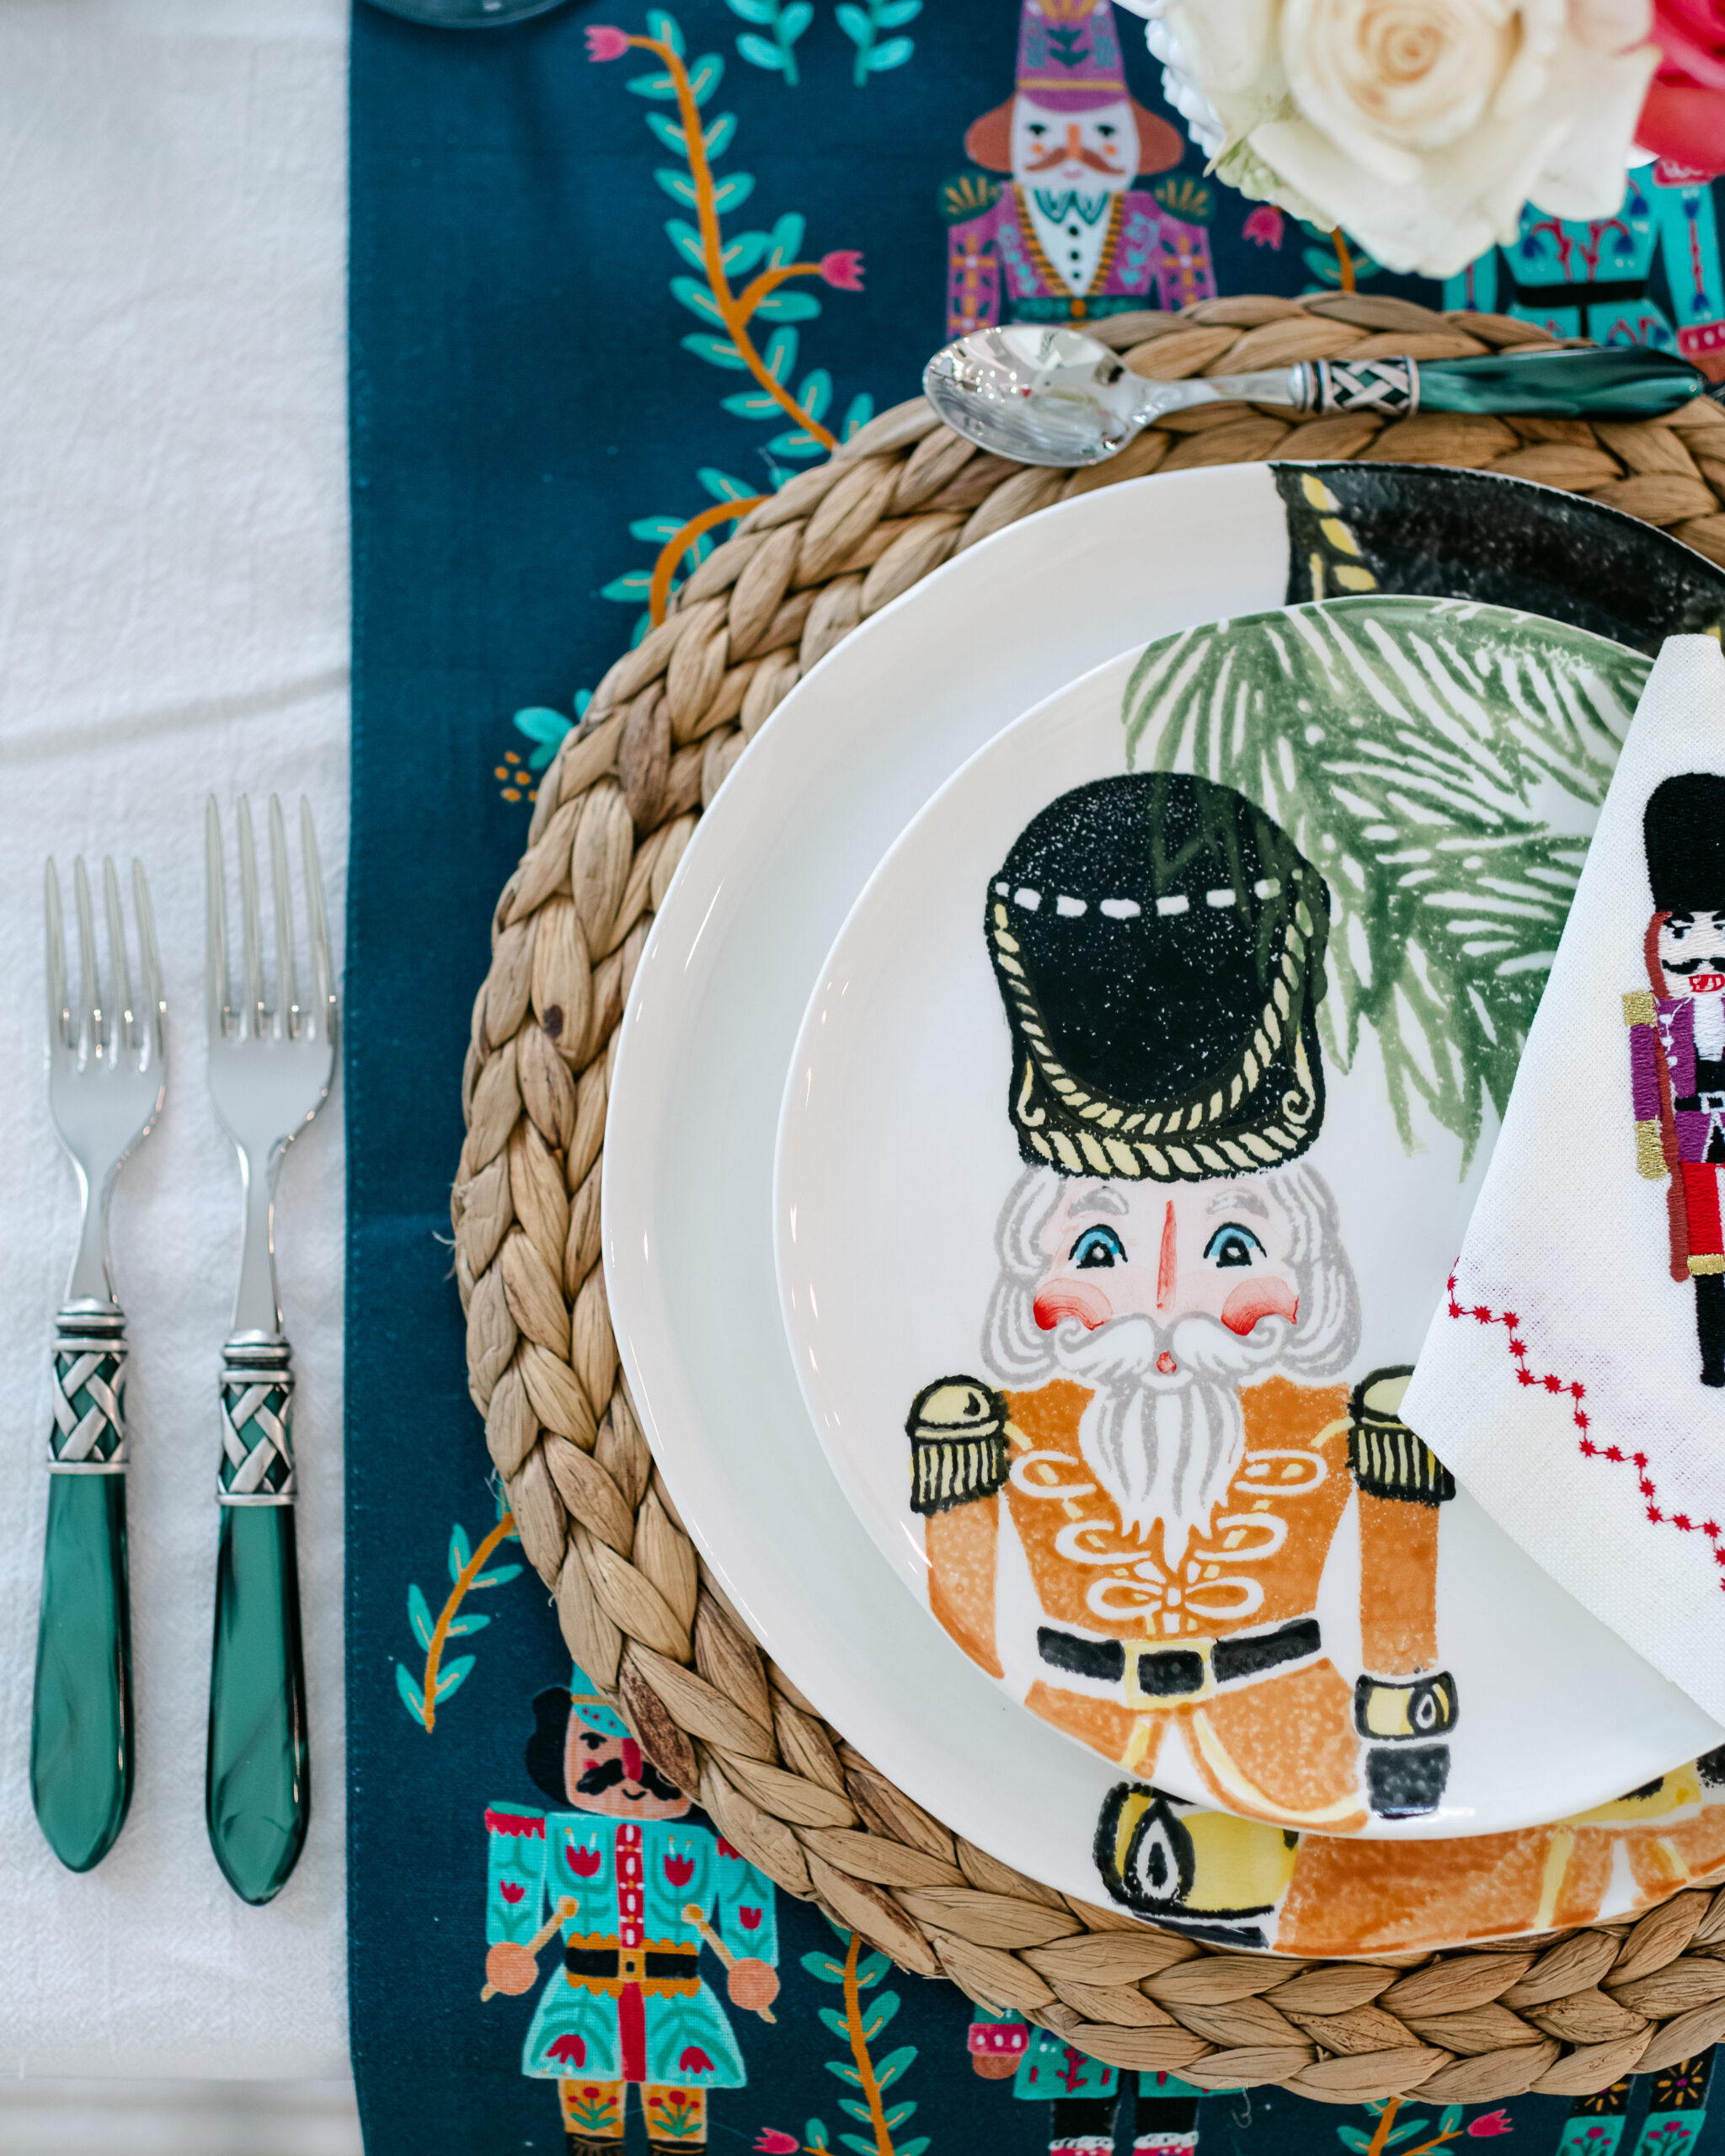 Deep jewel tones and colorful accents in each place setting